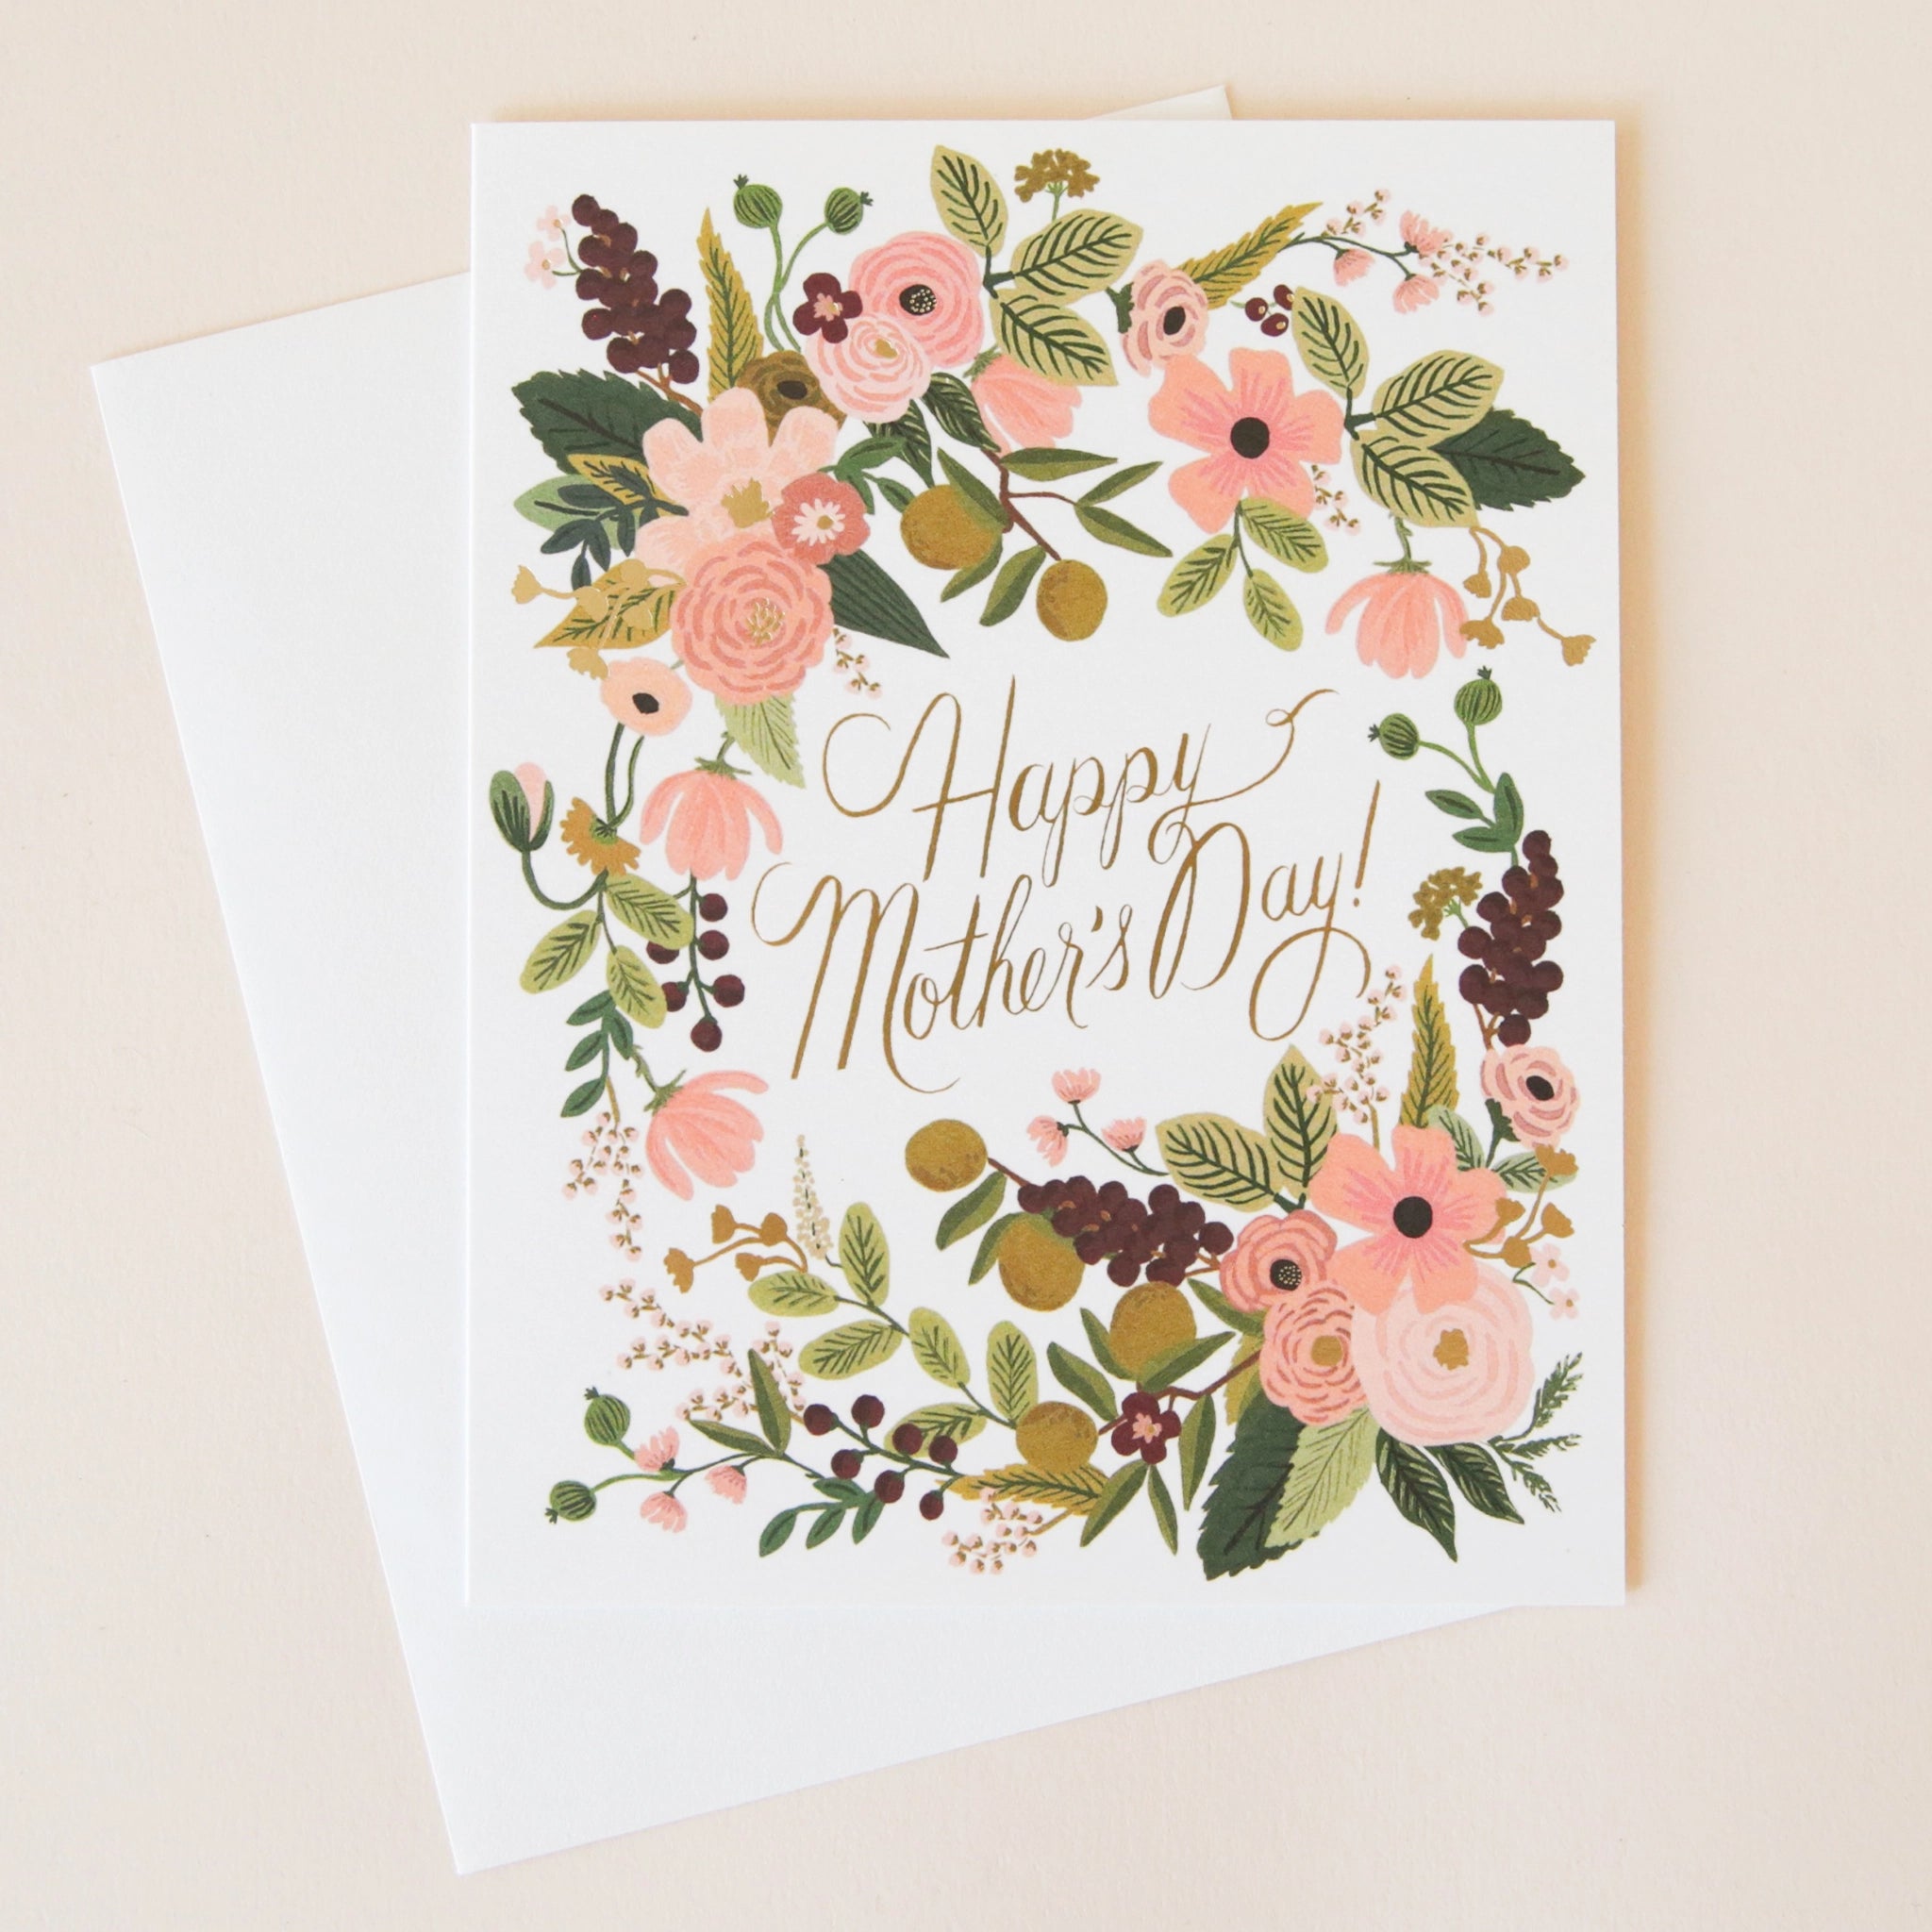 On a cream background is a white card with a pink and green floral design around the edges and text in the center that reads, "Happy Mother's Day!" along with a white envelope.